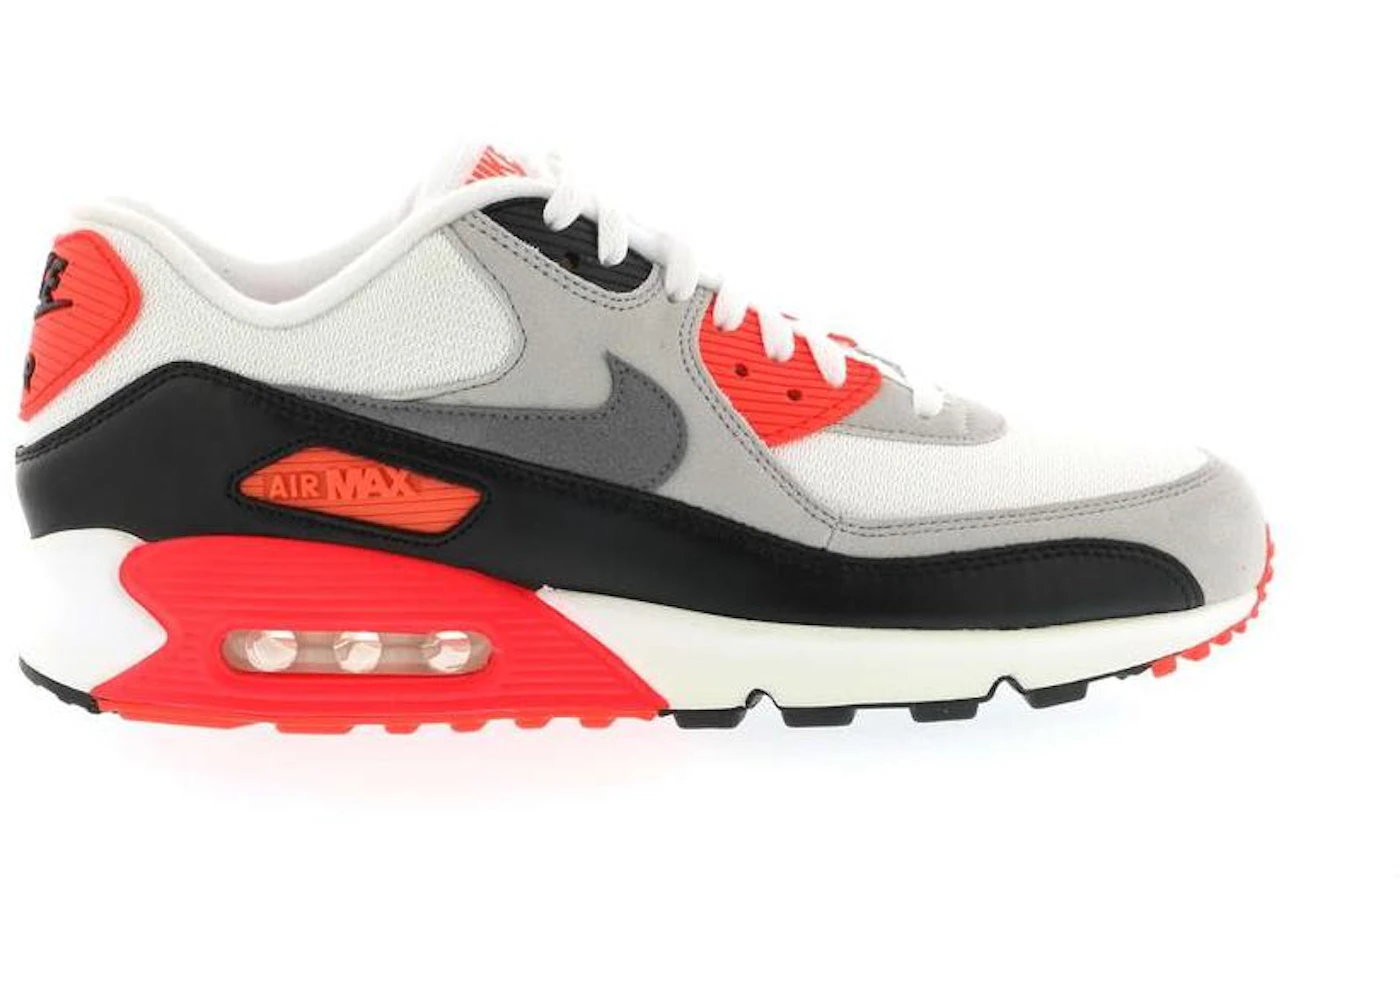 gambling cable Confuse Nike Air Max 90 OG Infrared (2015) - 725233-106 - US